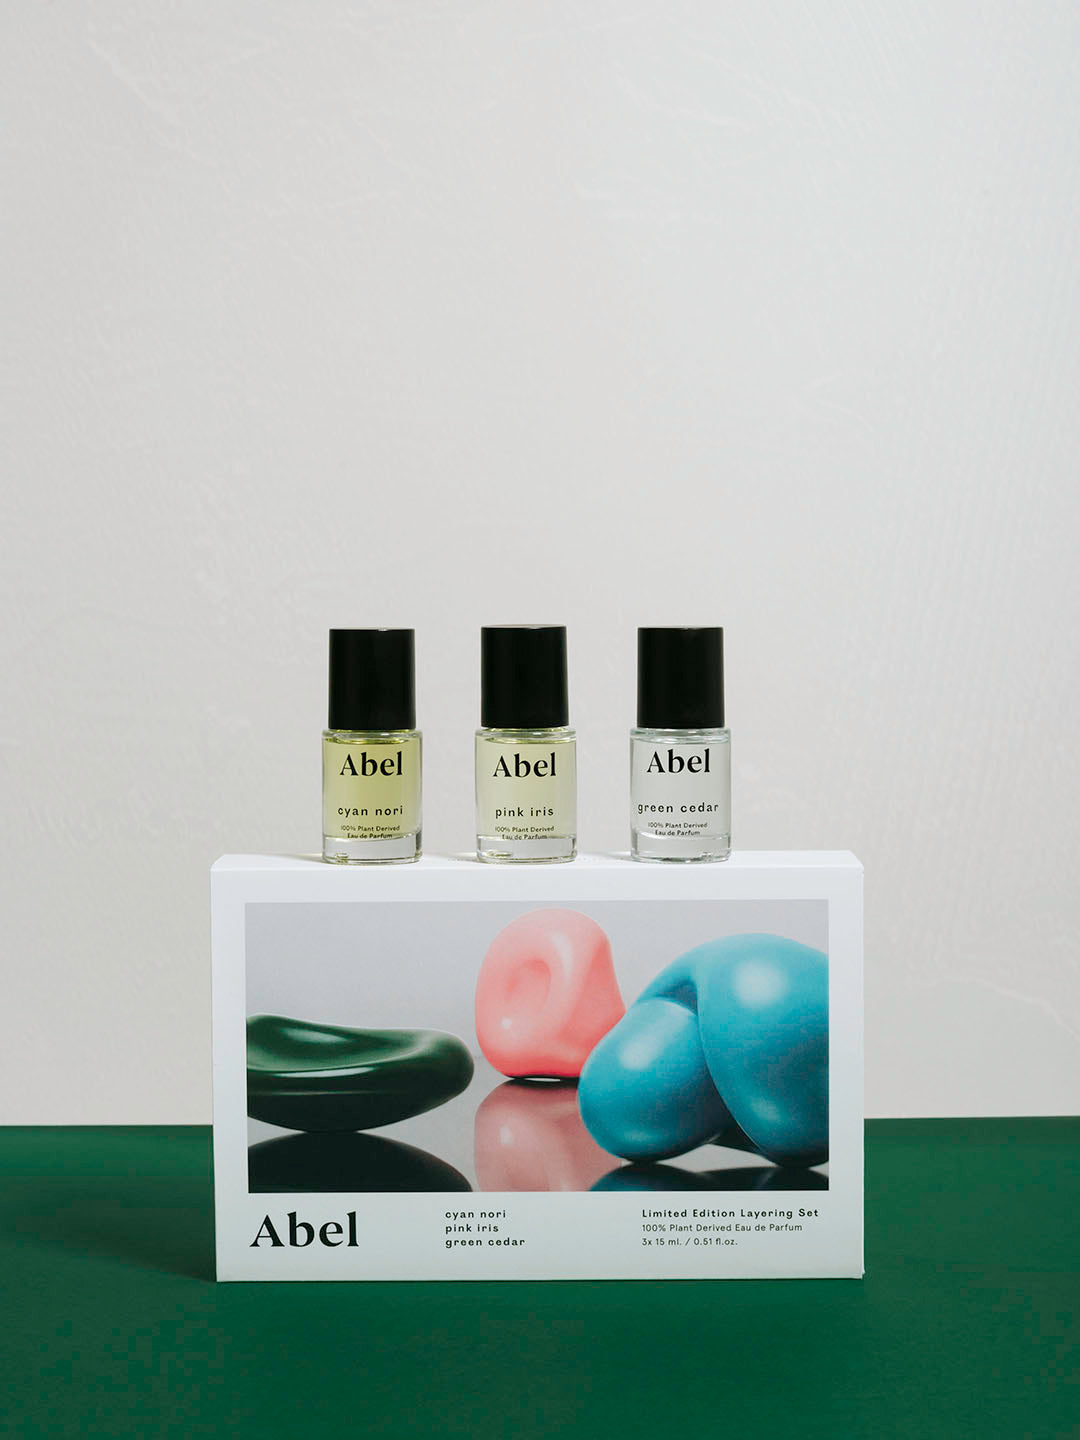 Three bottles of Abel Layering Set – Cyan Nori ⋄ Green Cedar ⋄ Pink Iris natural eau de parfum displayed in front of their packaging, which features images of colored stones.